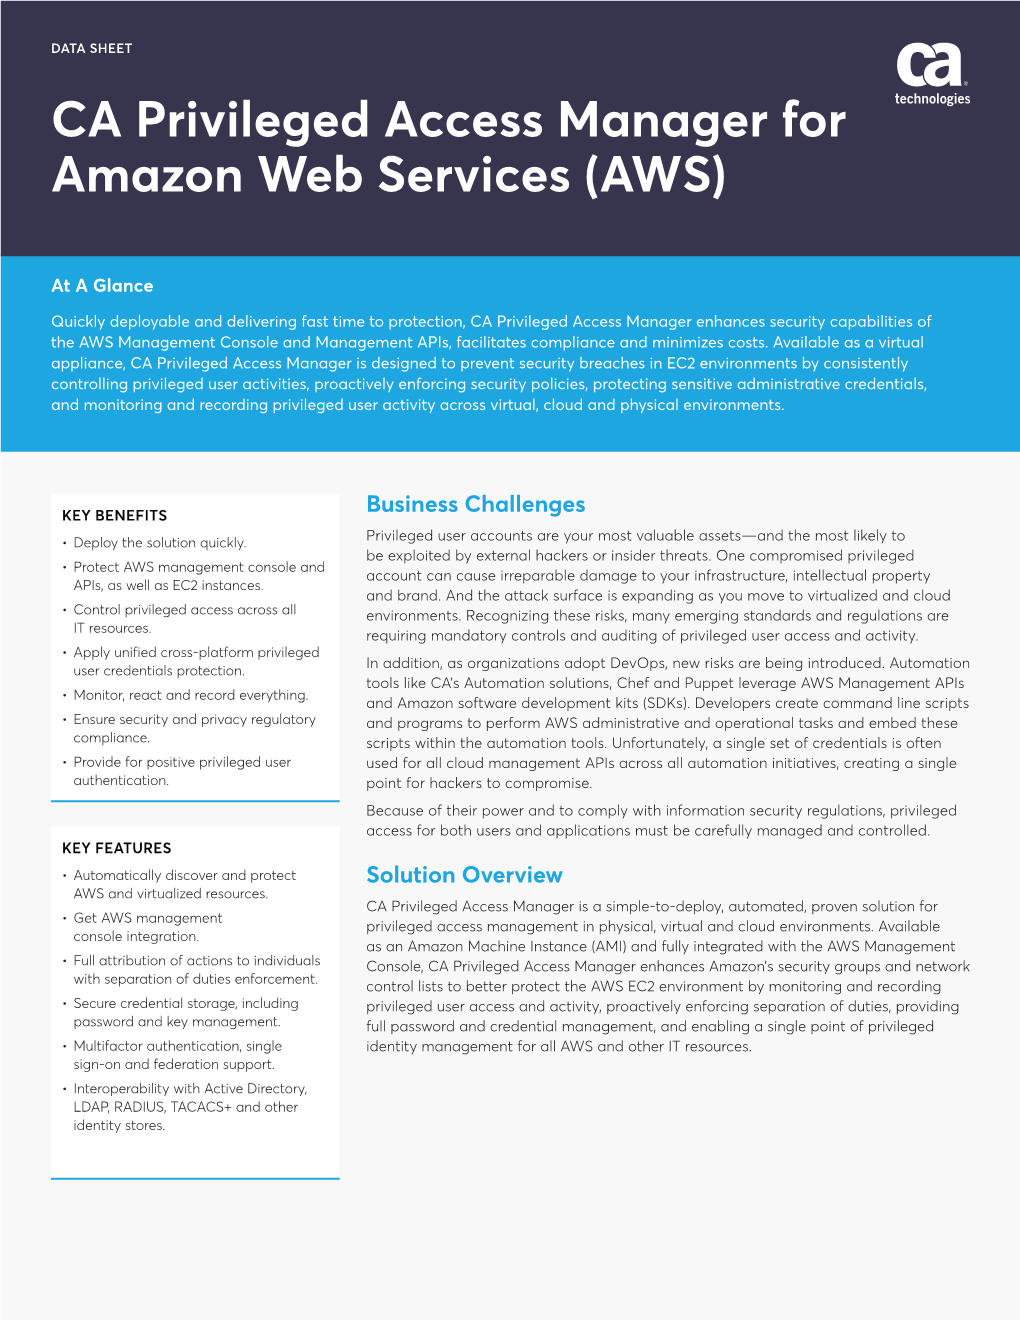 CA Privileged Access Manager for Amazon Web Services (AWS)